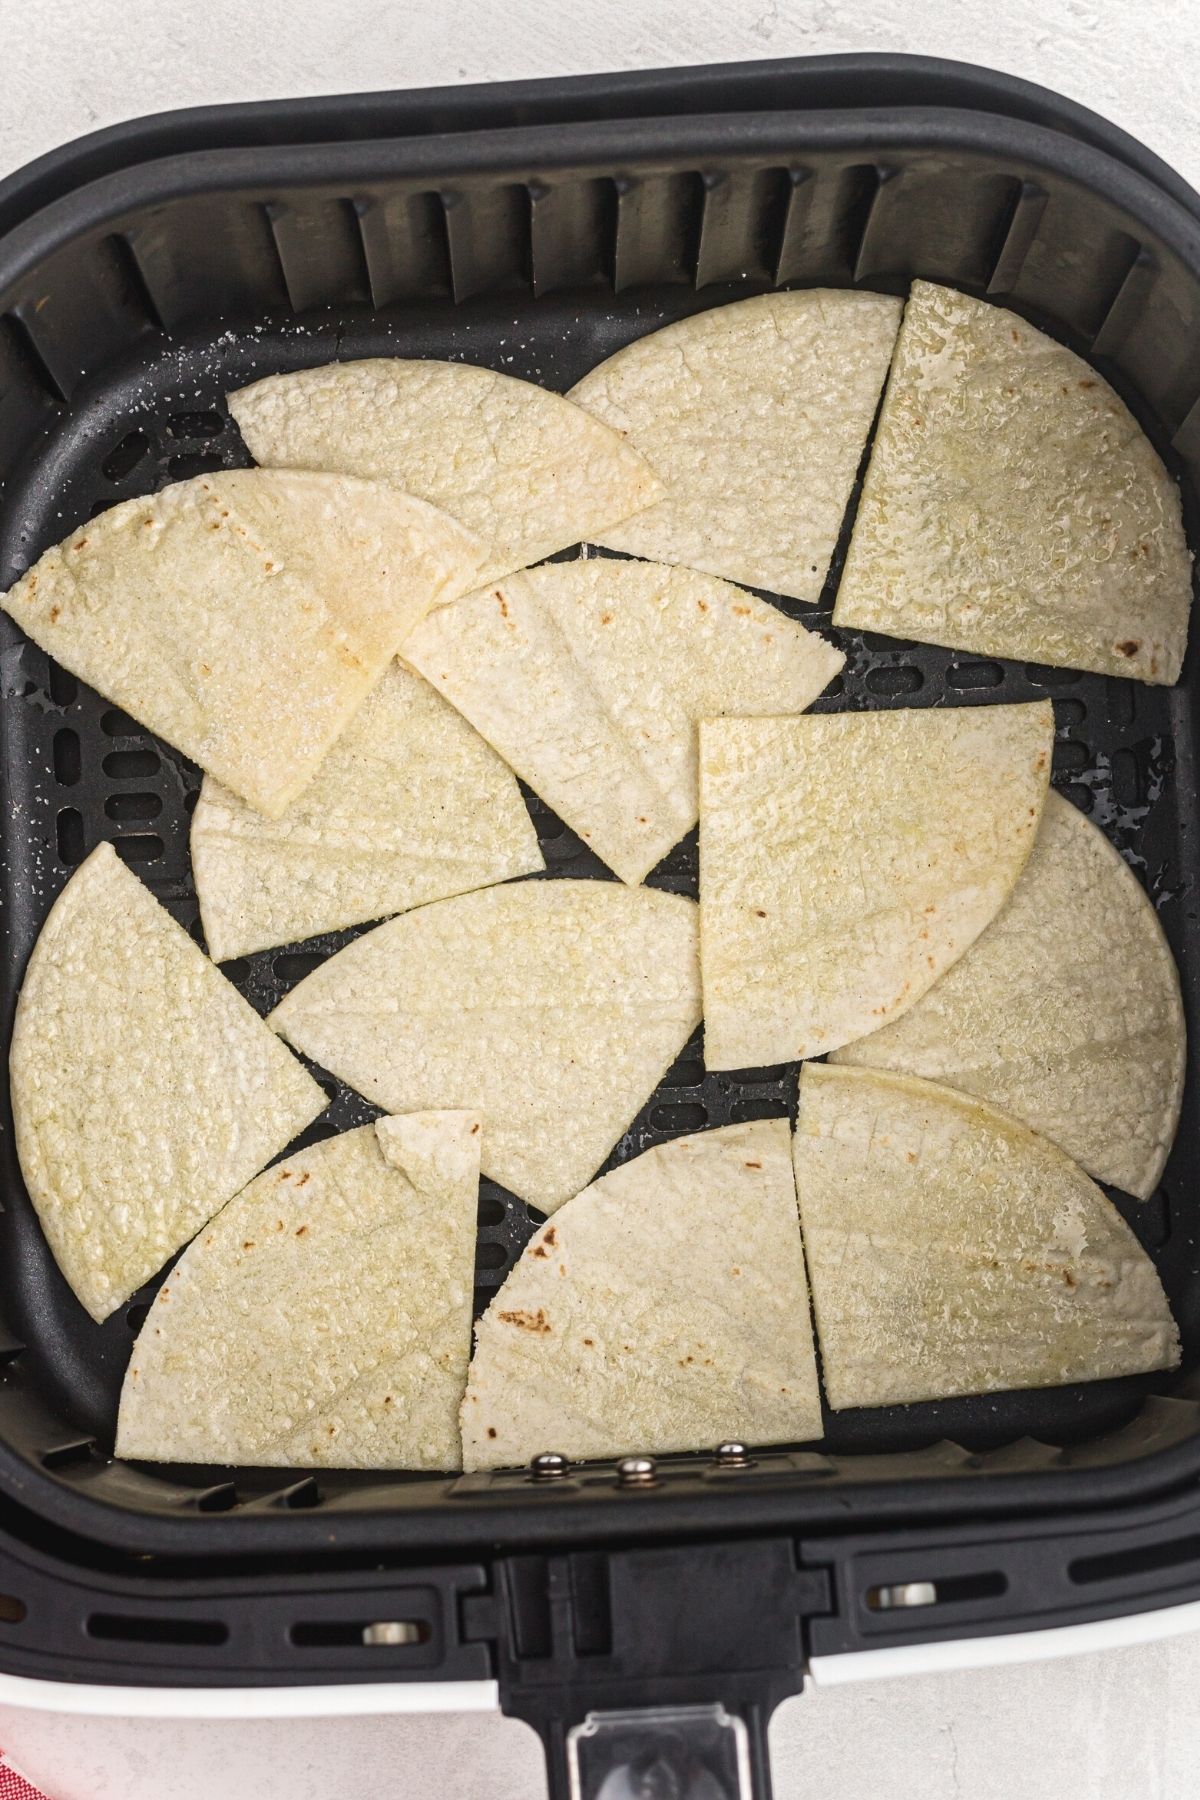 lightly oil and salted slices of tortillas placed in the air fryer basket.